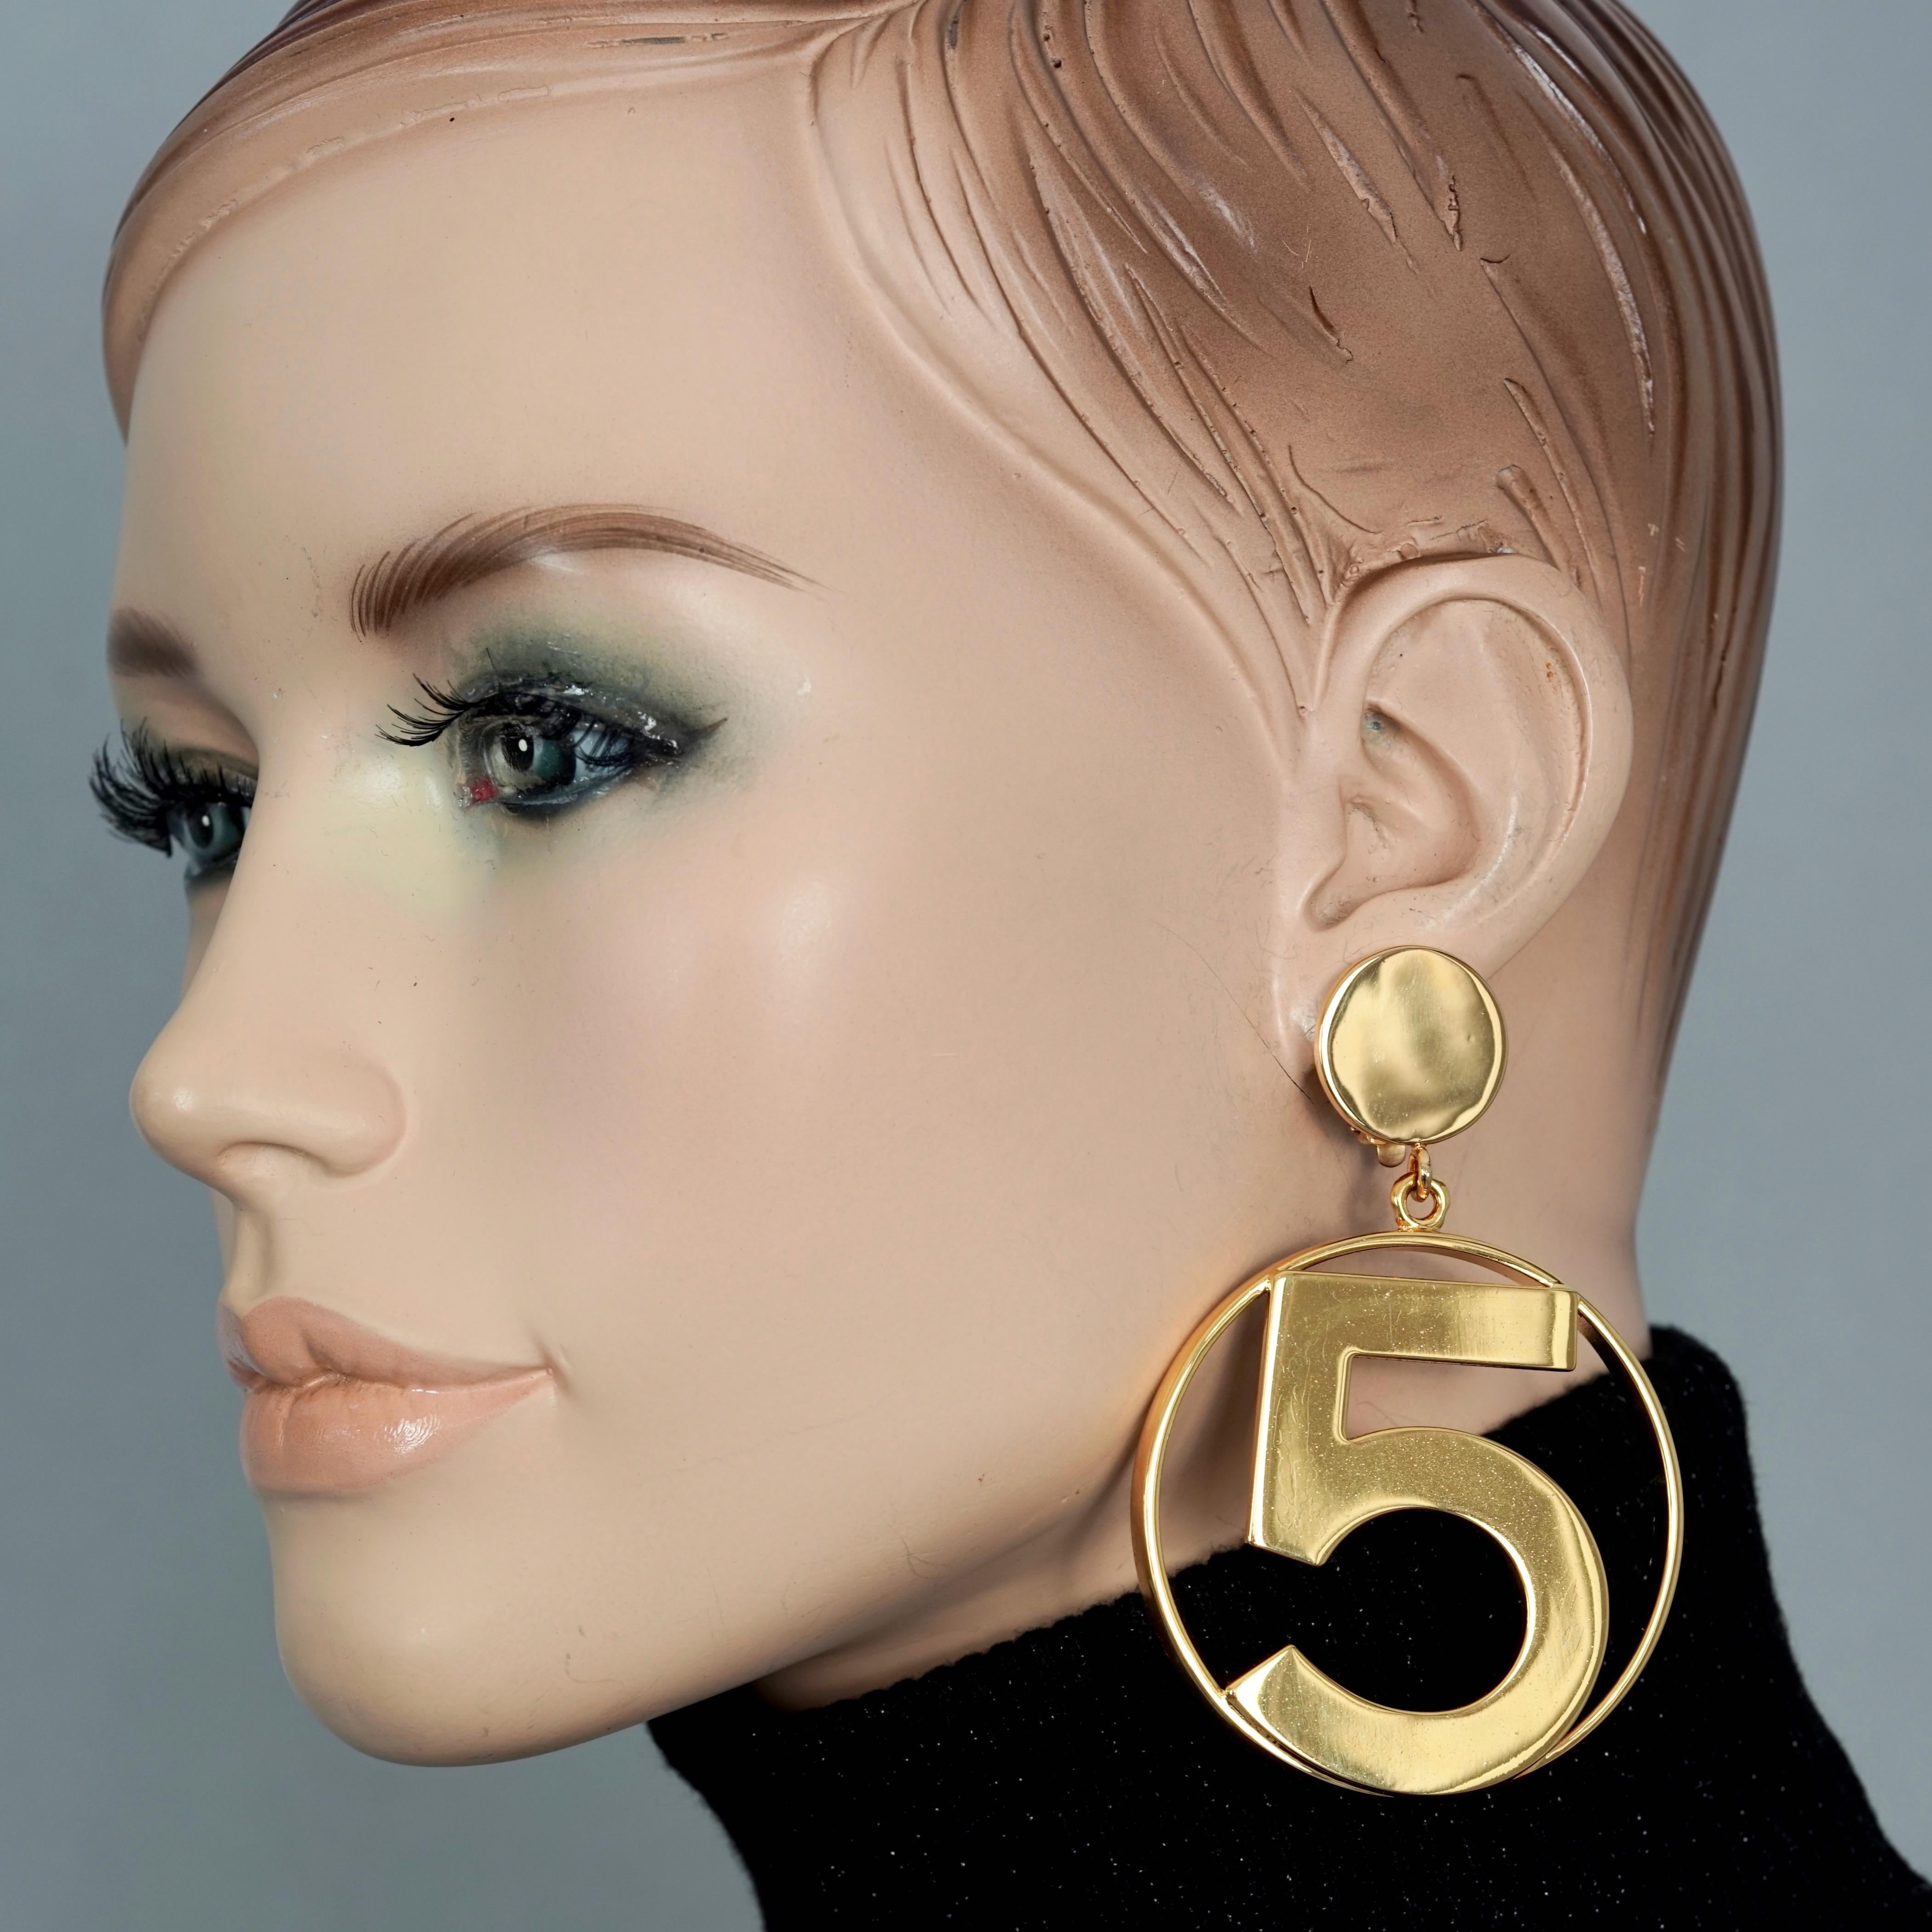 Vintage Jumbo CHANEL Iconic No 5 Hoop Earrings

Measurements:
Height: 3.35 inches (8.5 cm)
Width: 2.20 inches (5.6 cm)
Weight per Earring: 35 grams

Features:
- 100% Authentic CHANEL.
- Iconic jumbo hoop earrings with No. 5 at the centre.
- Gold